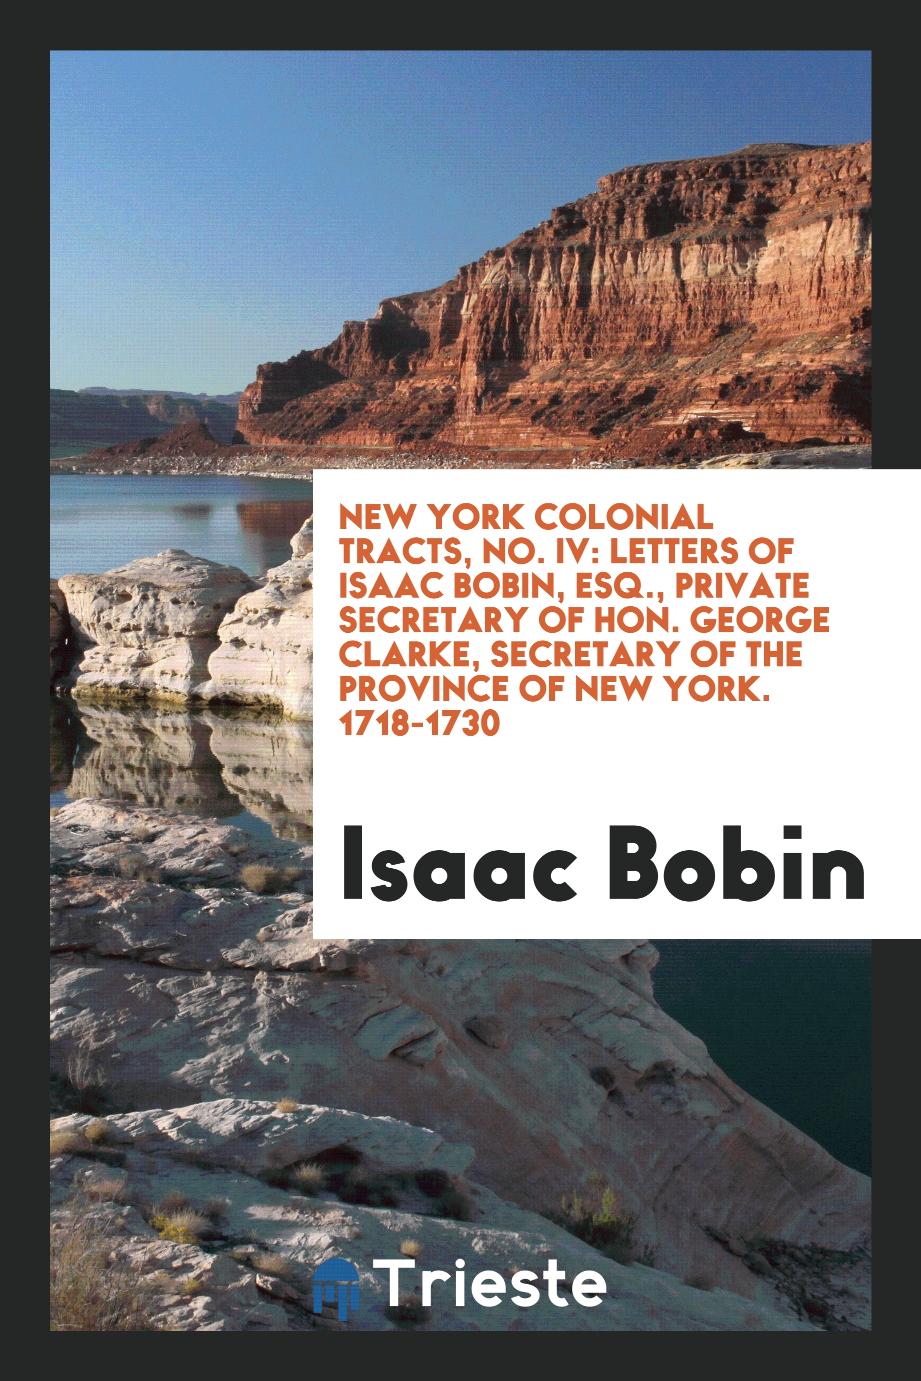 New York Colonial Tracts, No. IV: Letters of Isaac Bobin, esq., Private secretary of Hon. George Clarke, secretary of the province of New York. 1718-1730